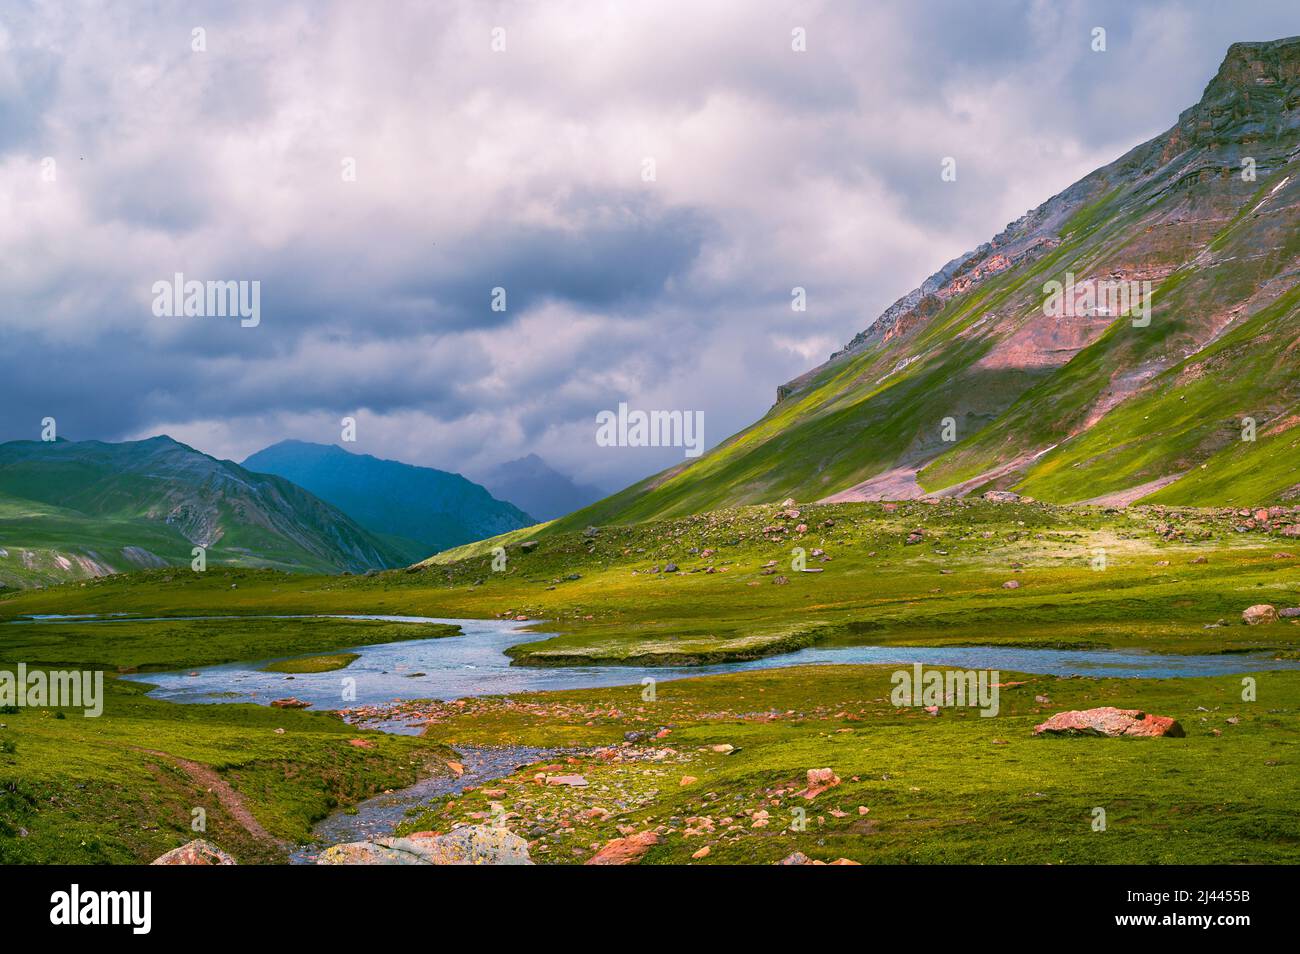 Landscape with mountains, clouds and blue sky. Beautiful meadows on the way from Kashmir Great Lakes Trek, Jammu and Kashmir, India. Stock Photo